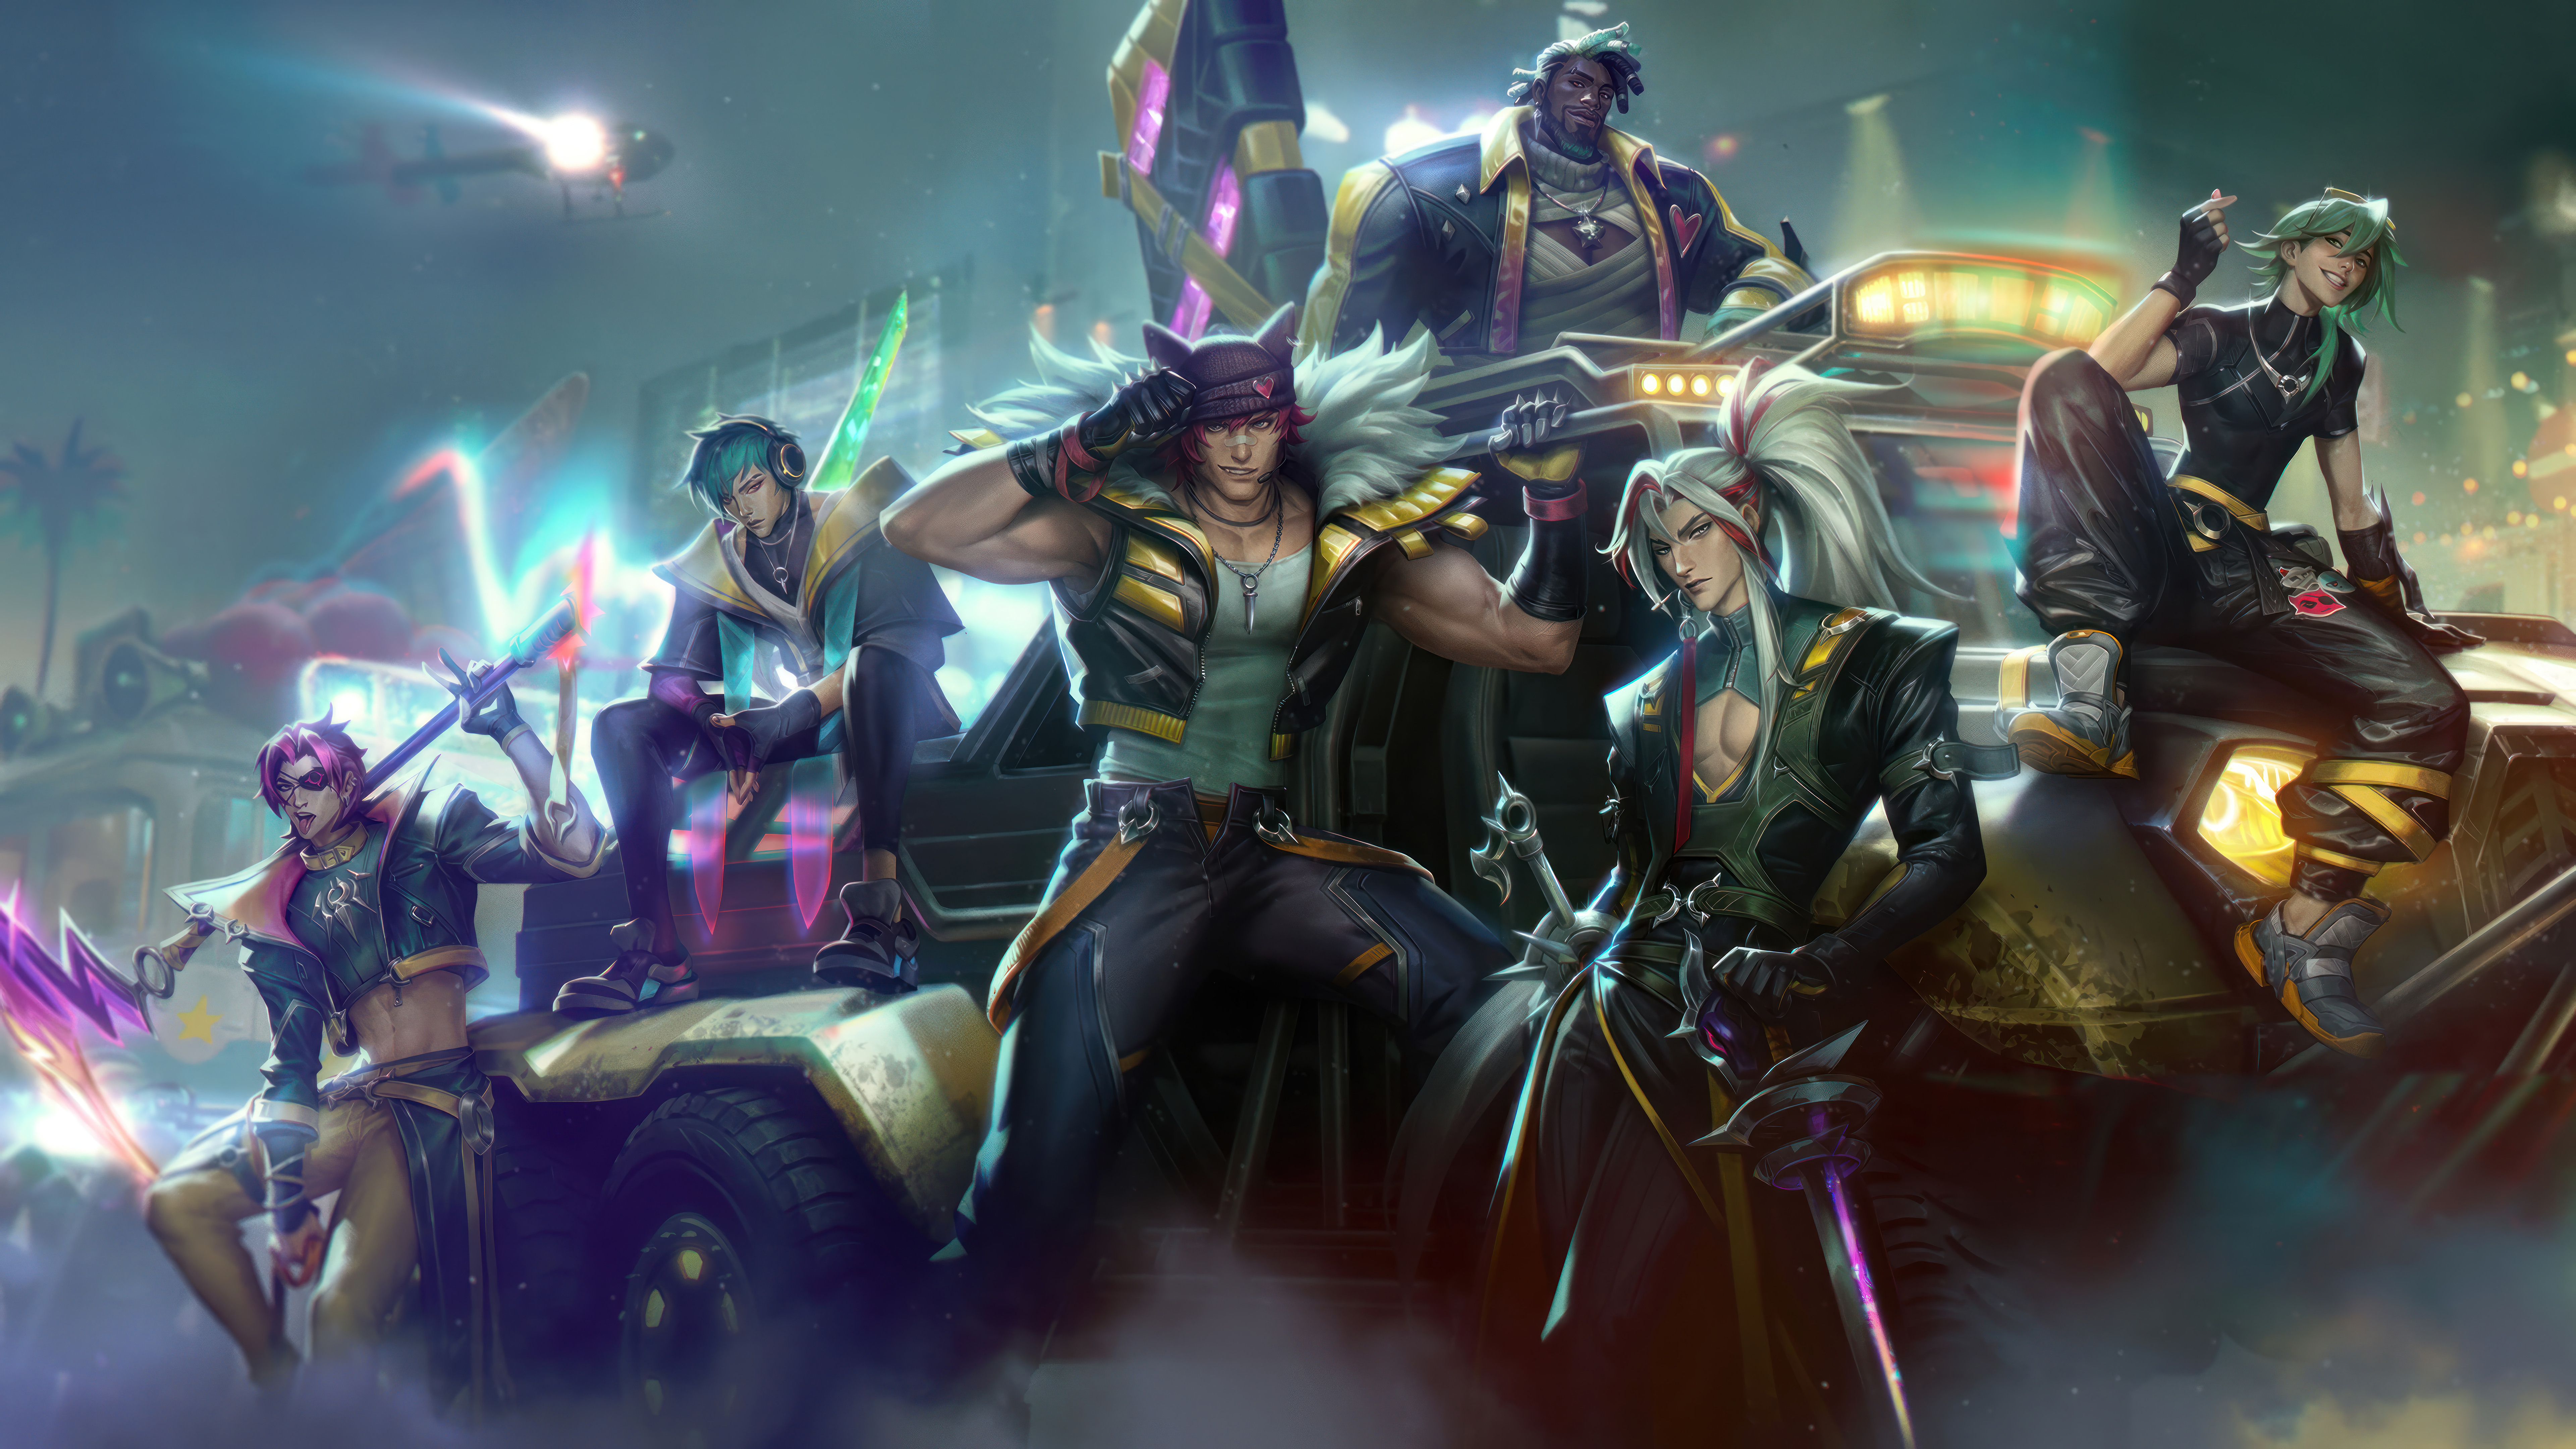 General 7680x4320 Heartsteel (League of Legends) Yone (League of Legends) Sett (League of Legends) Ezreal (League Of Legends) K'Sante (League of Legends) Aphelios (League of legends) Kayn (League of Legends) digital art Riot Games GZG video games Music game boy bands League of Legends 4K looking at viewer